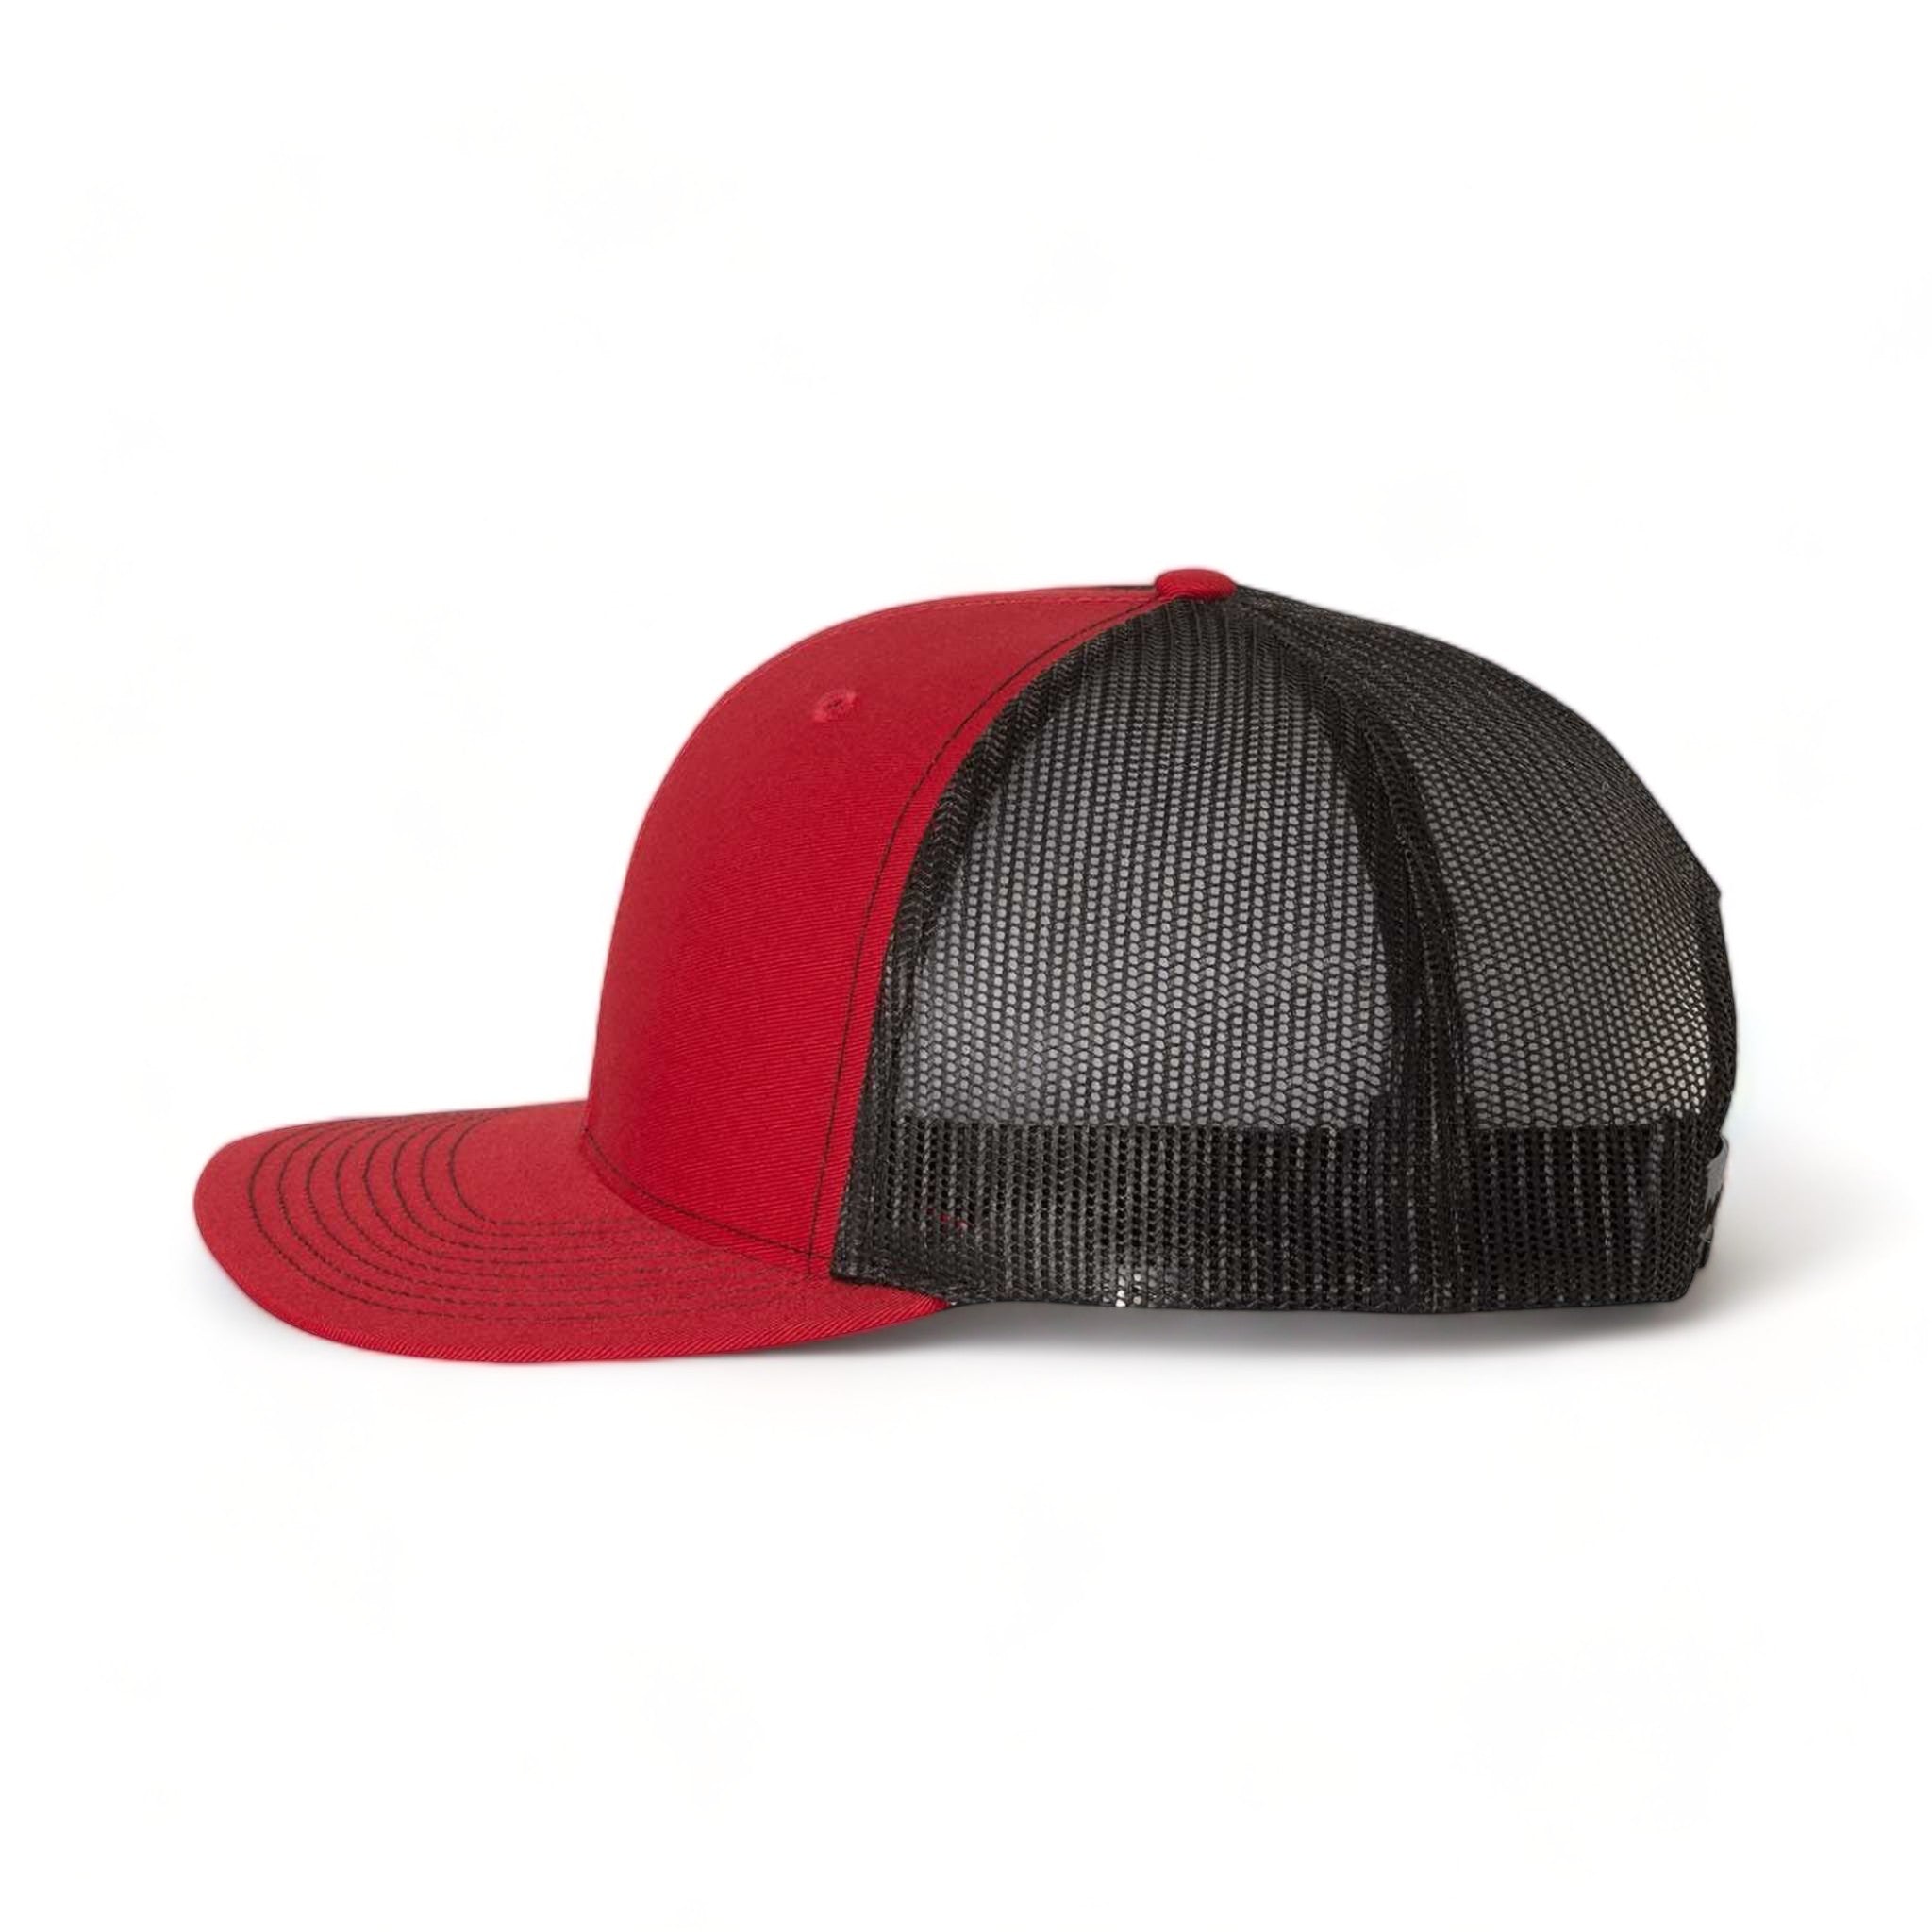 Side view of Richardson 112 custom hat in red and black